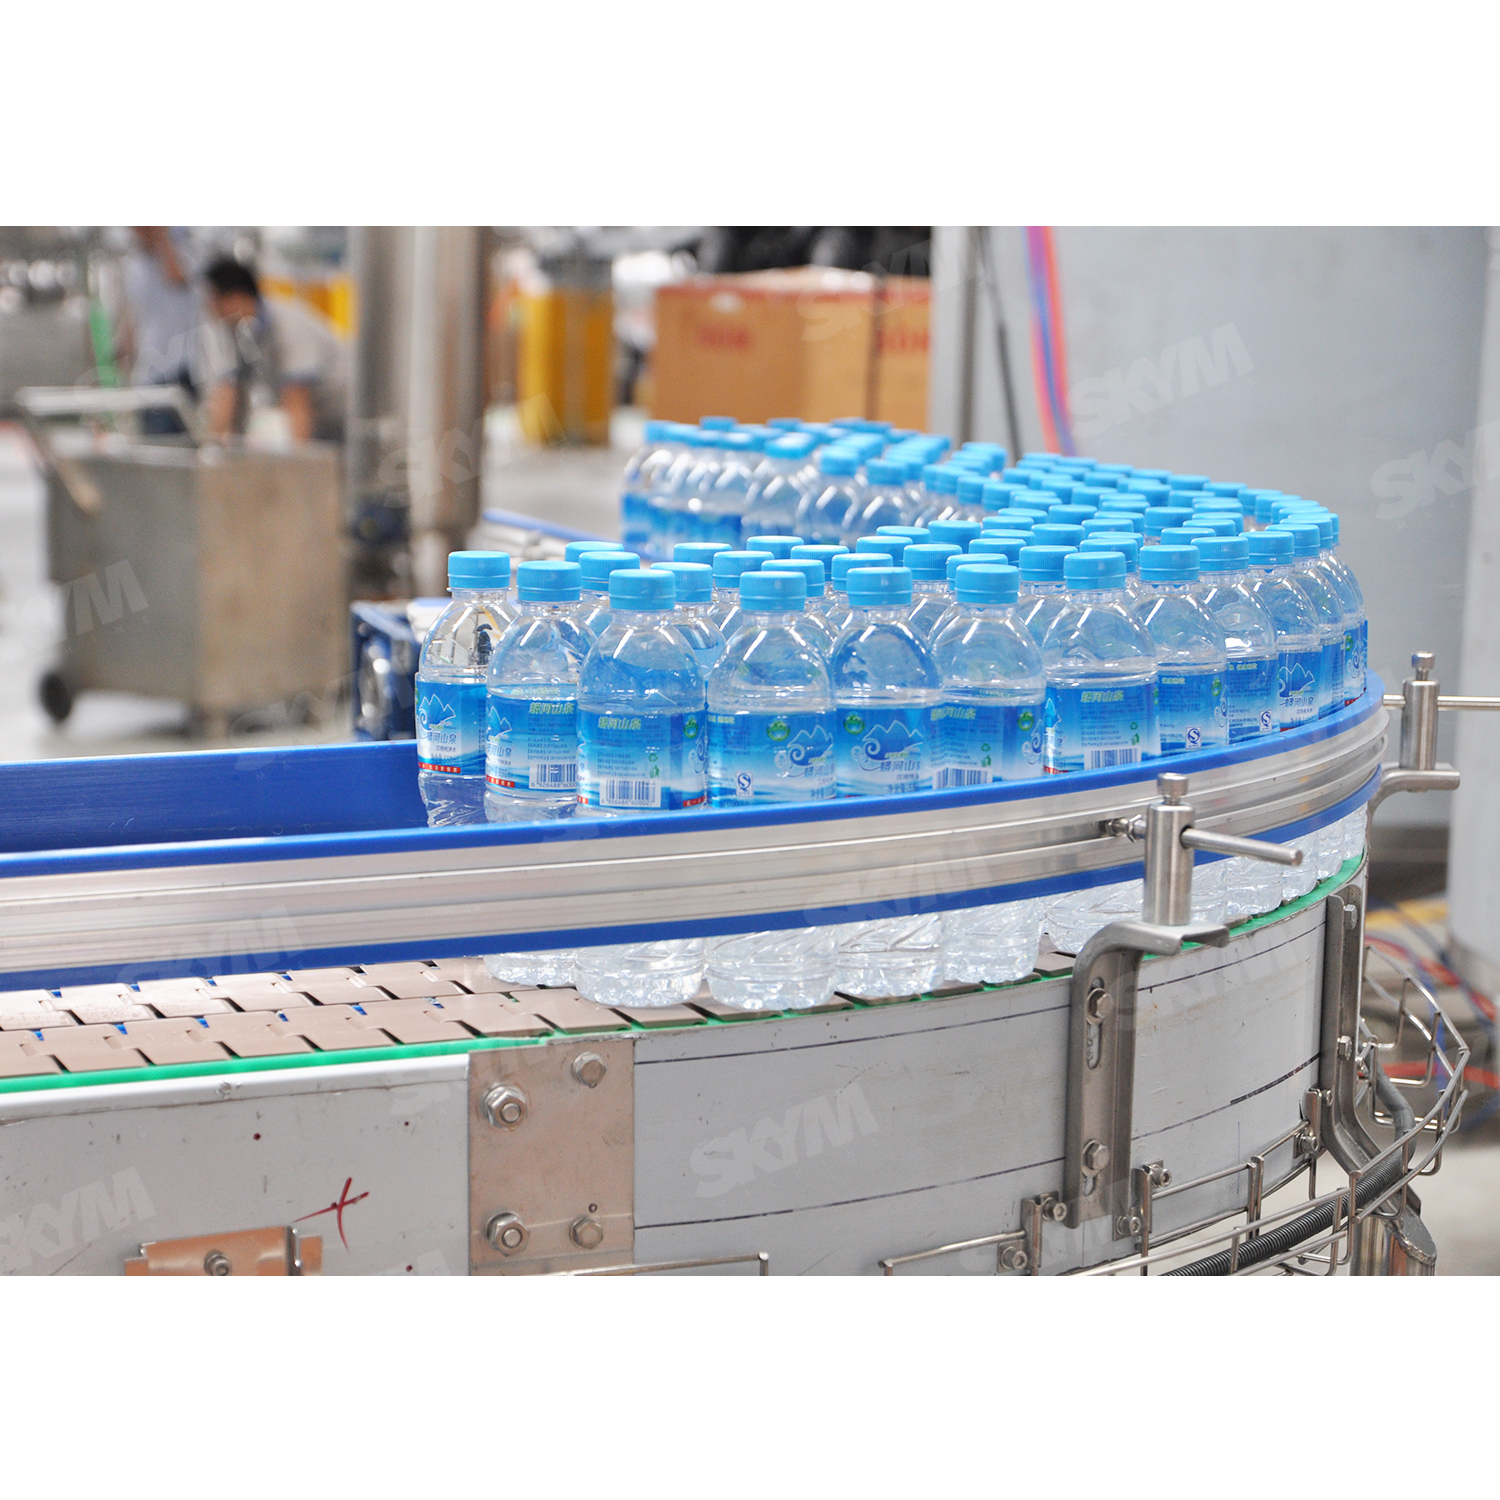 20000 Bottles One Hour Automatic Mineral Water Filling Machine